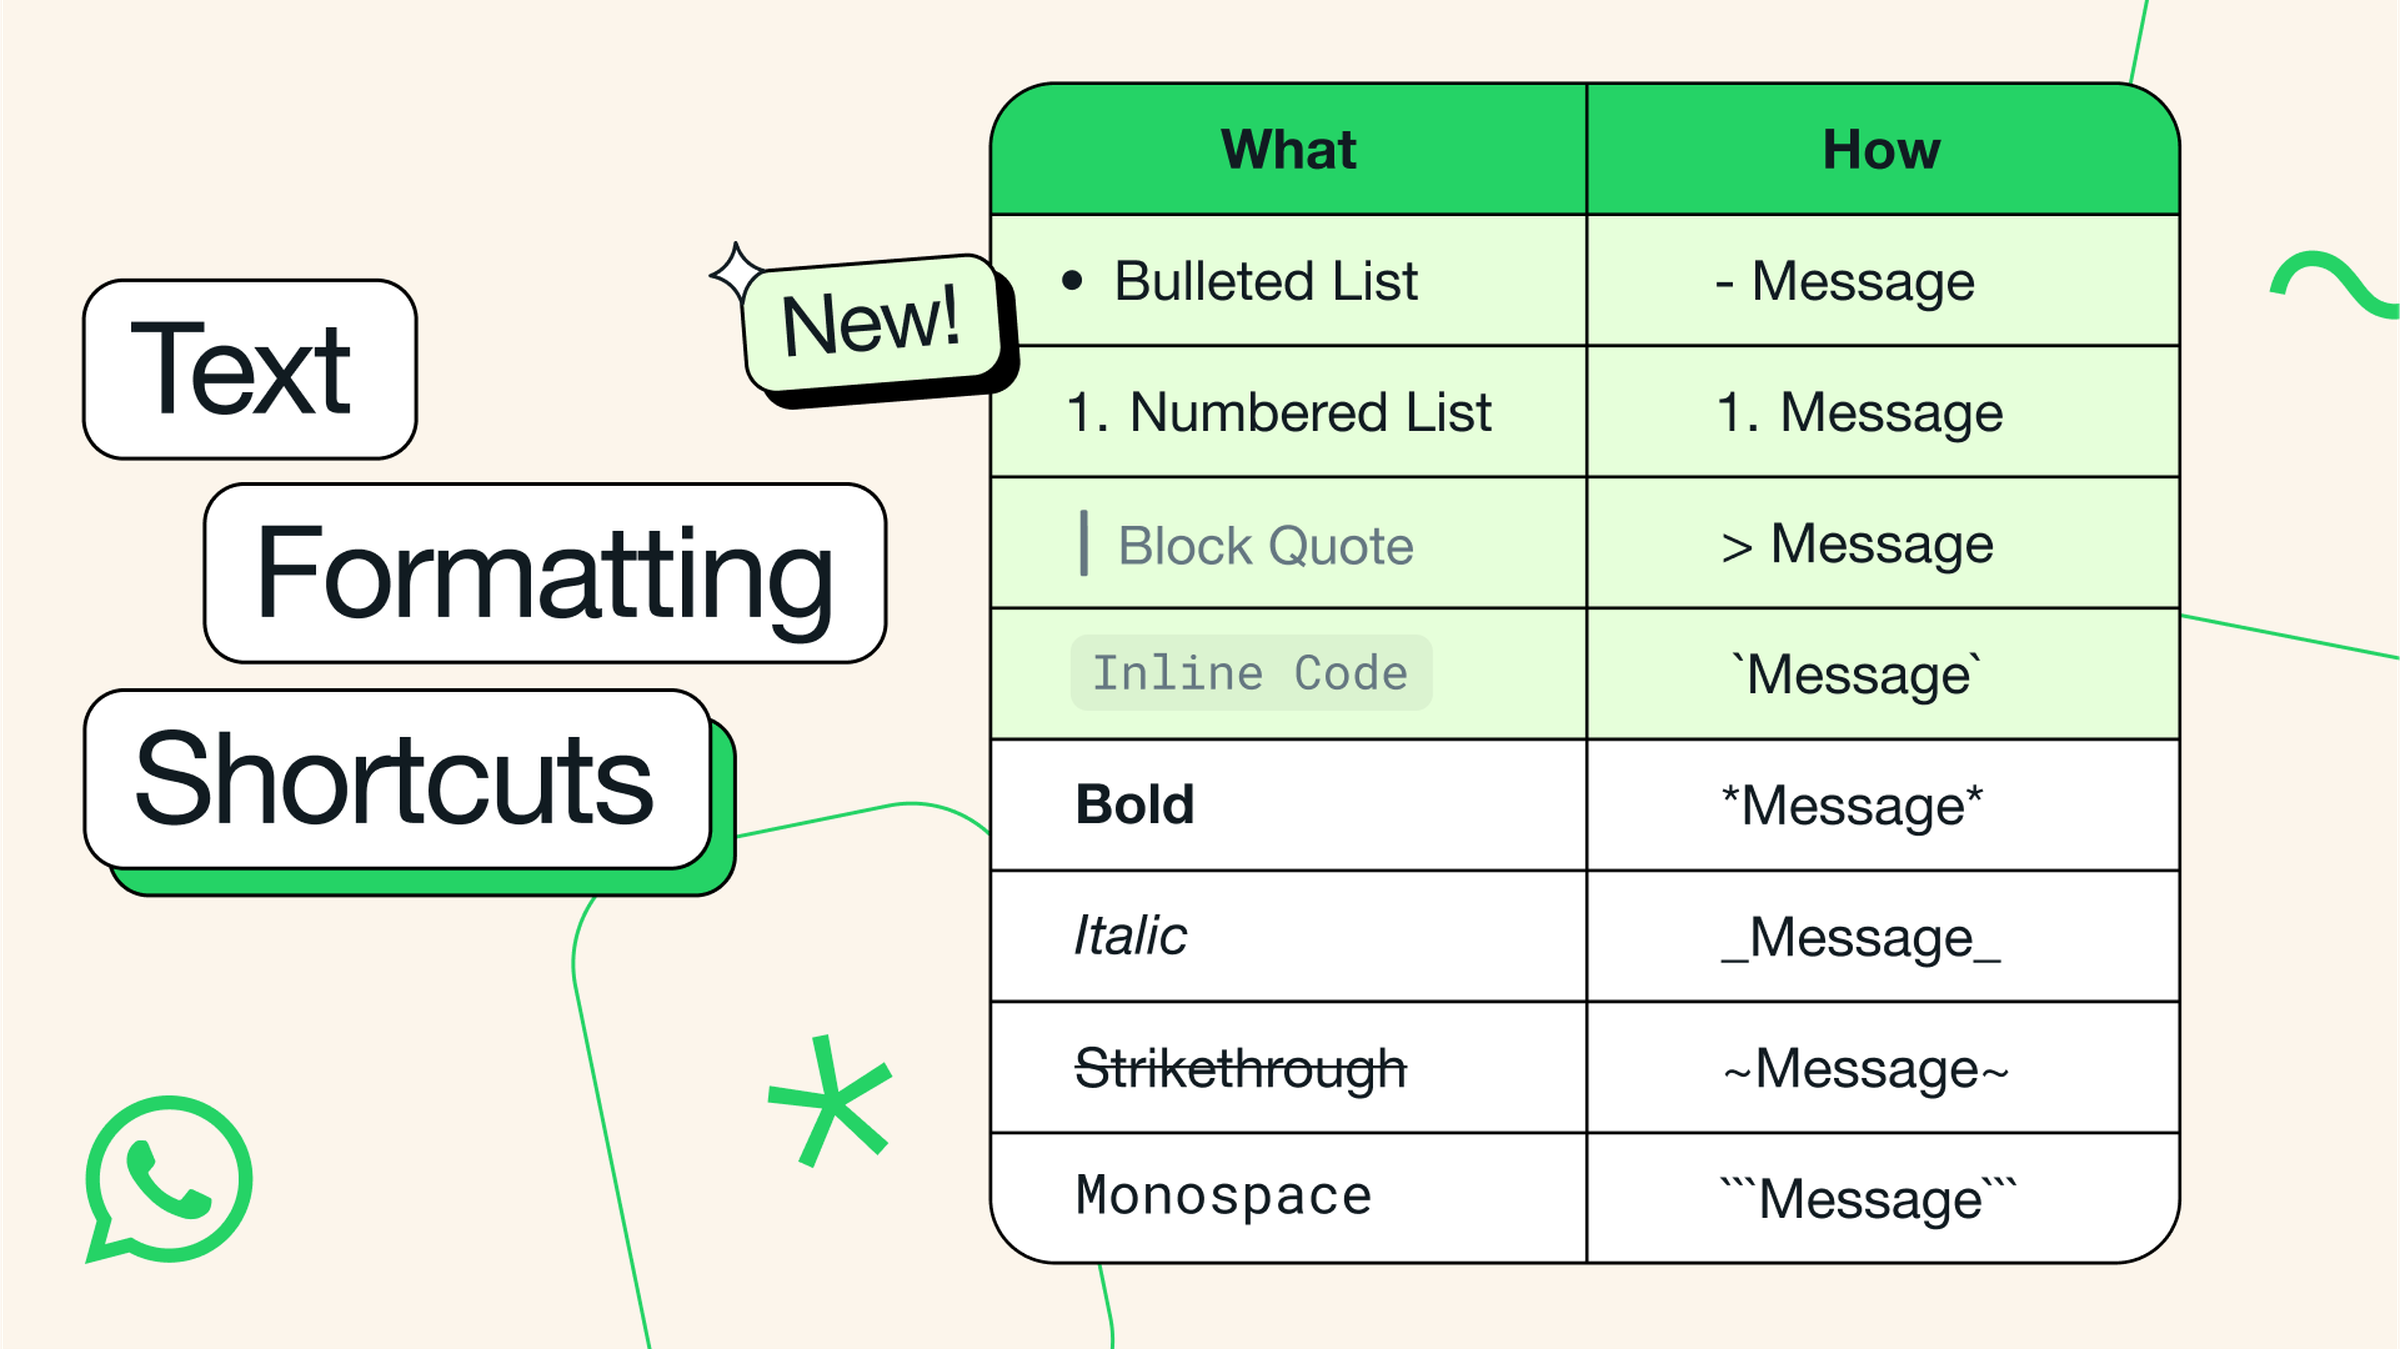 An illustration guide showing the shortcuts needed to use WhatsApp’s new text formatting options.